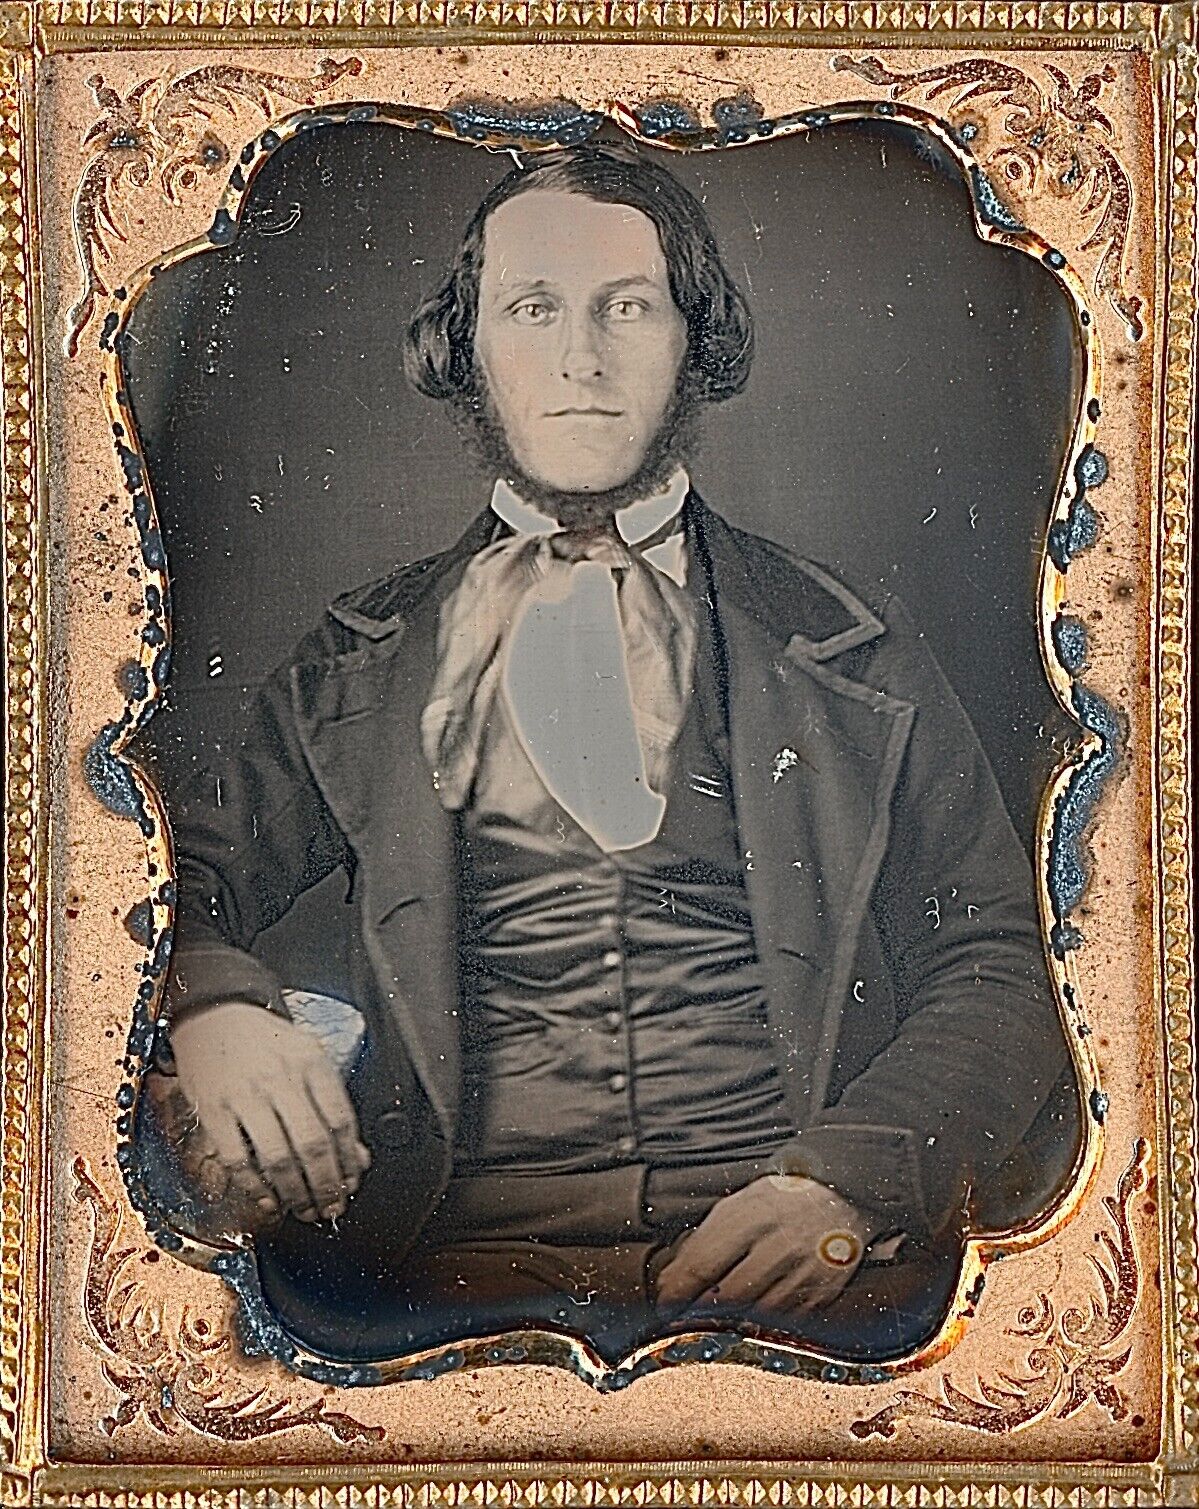 Long Haired Light Eyed Young Gentleman With Beard 1/9 Plate Daguerreotype S718